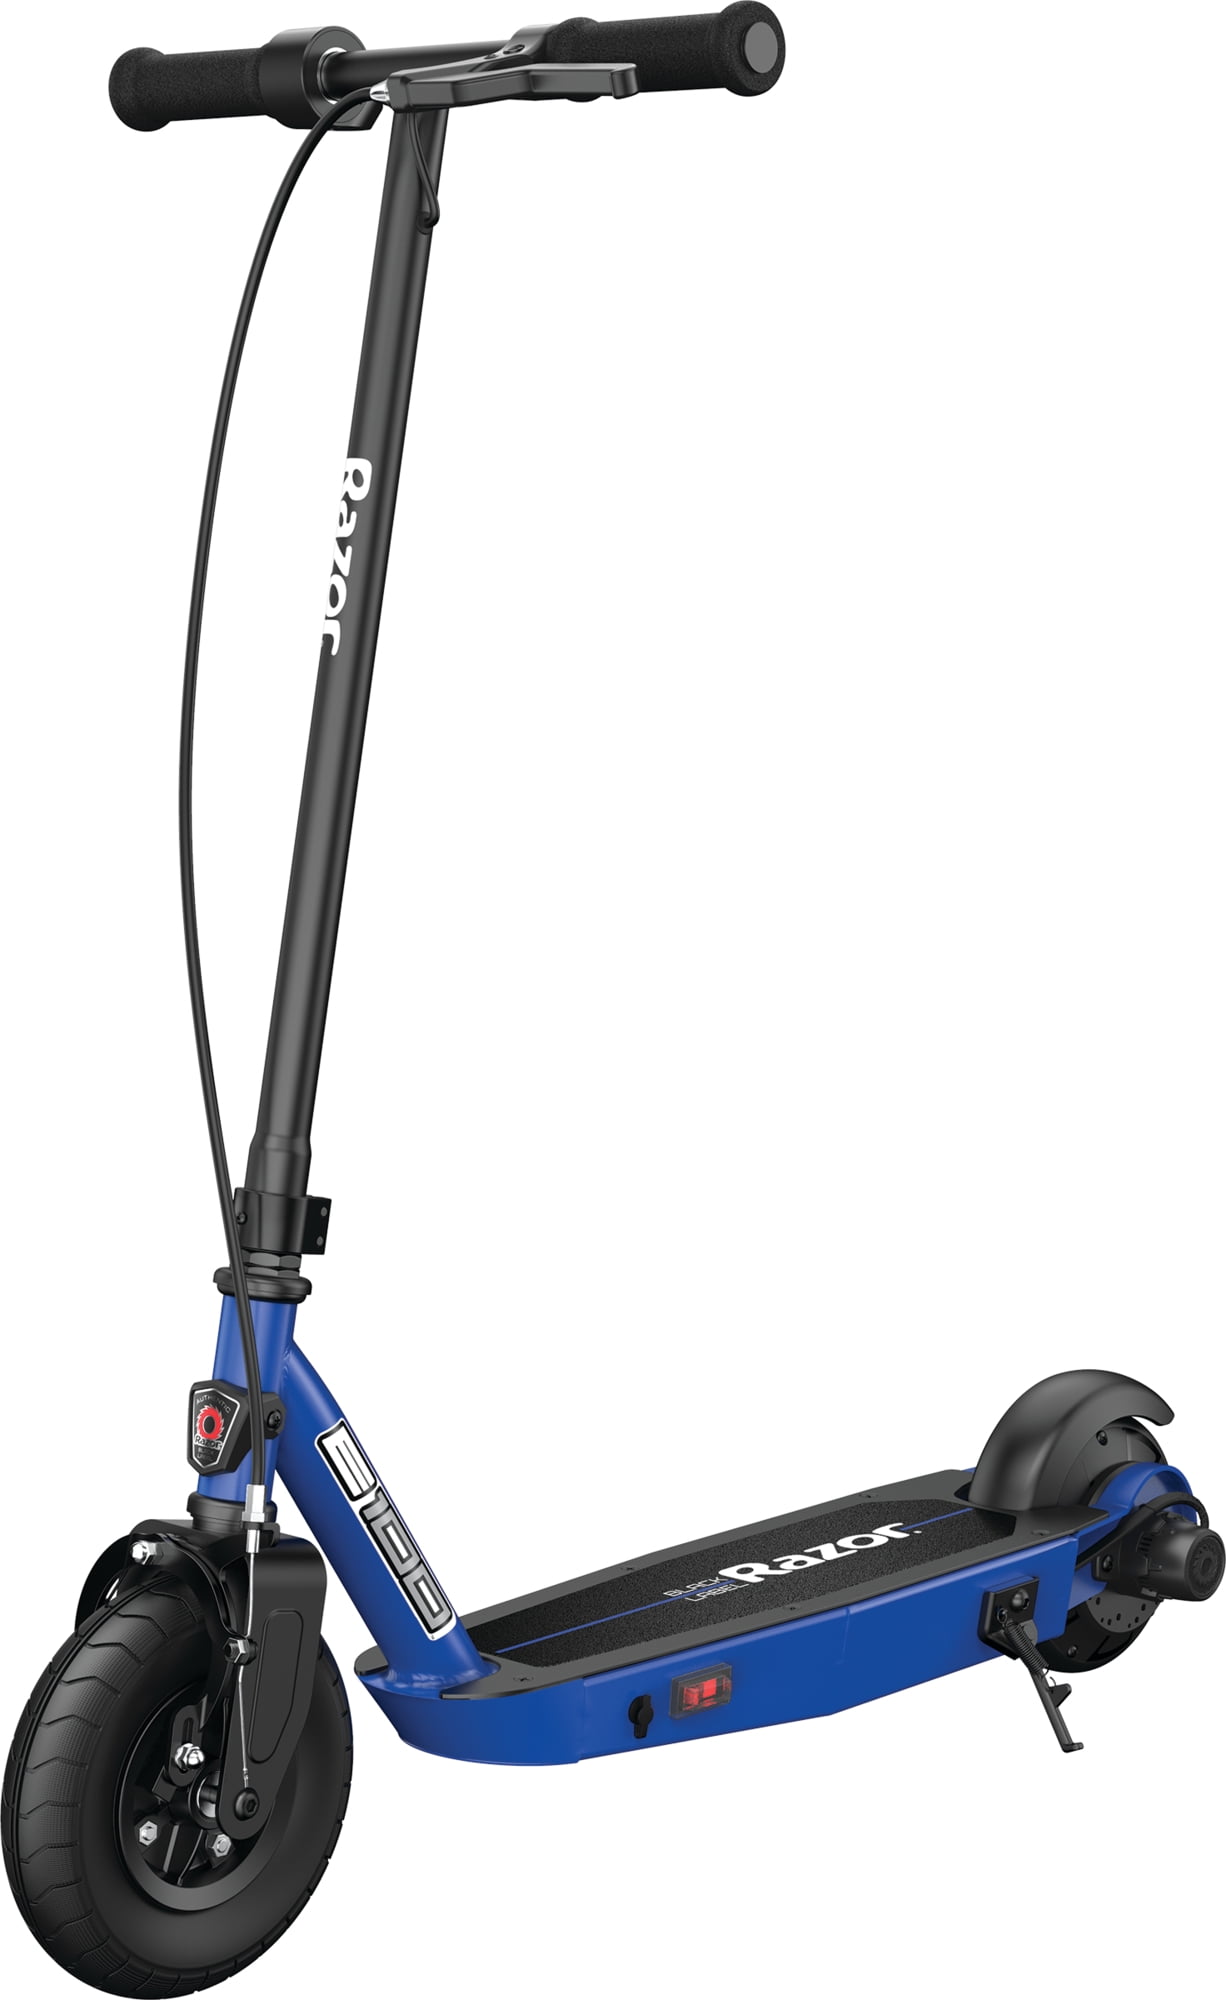 rørledning Ud vedhæng Razor Black Label E100 Electric Scooter - Blue, for Kids Ages 8+ and up to  120 lbs, 8" Pneumatic Front Tire, Up to 10 mph & up to 35 mins of Ride